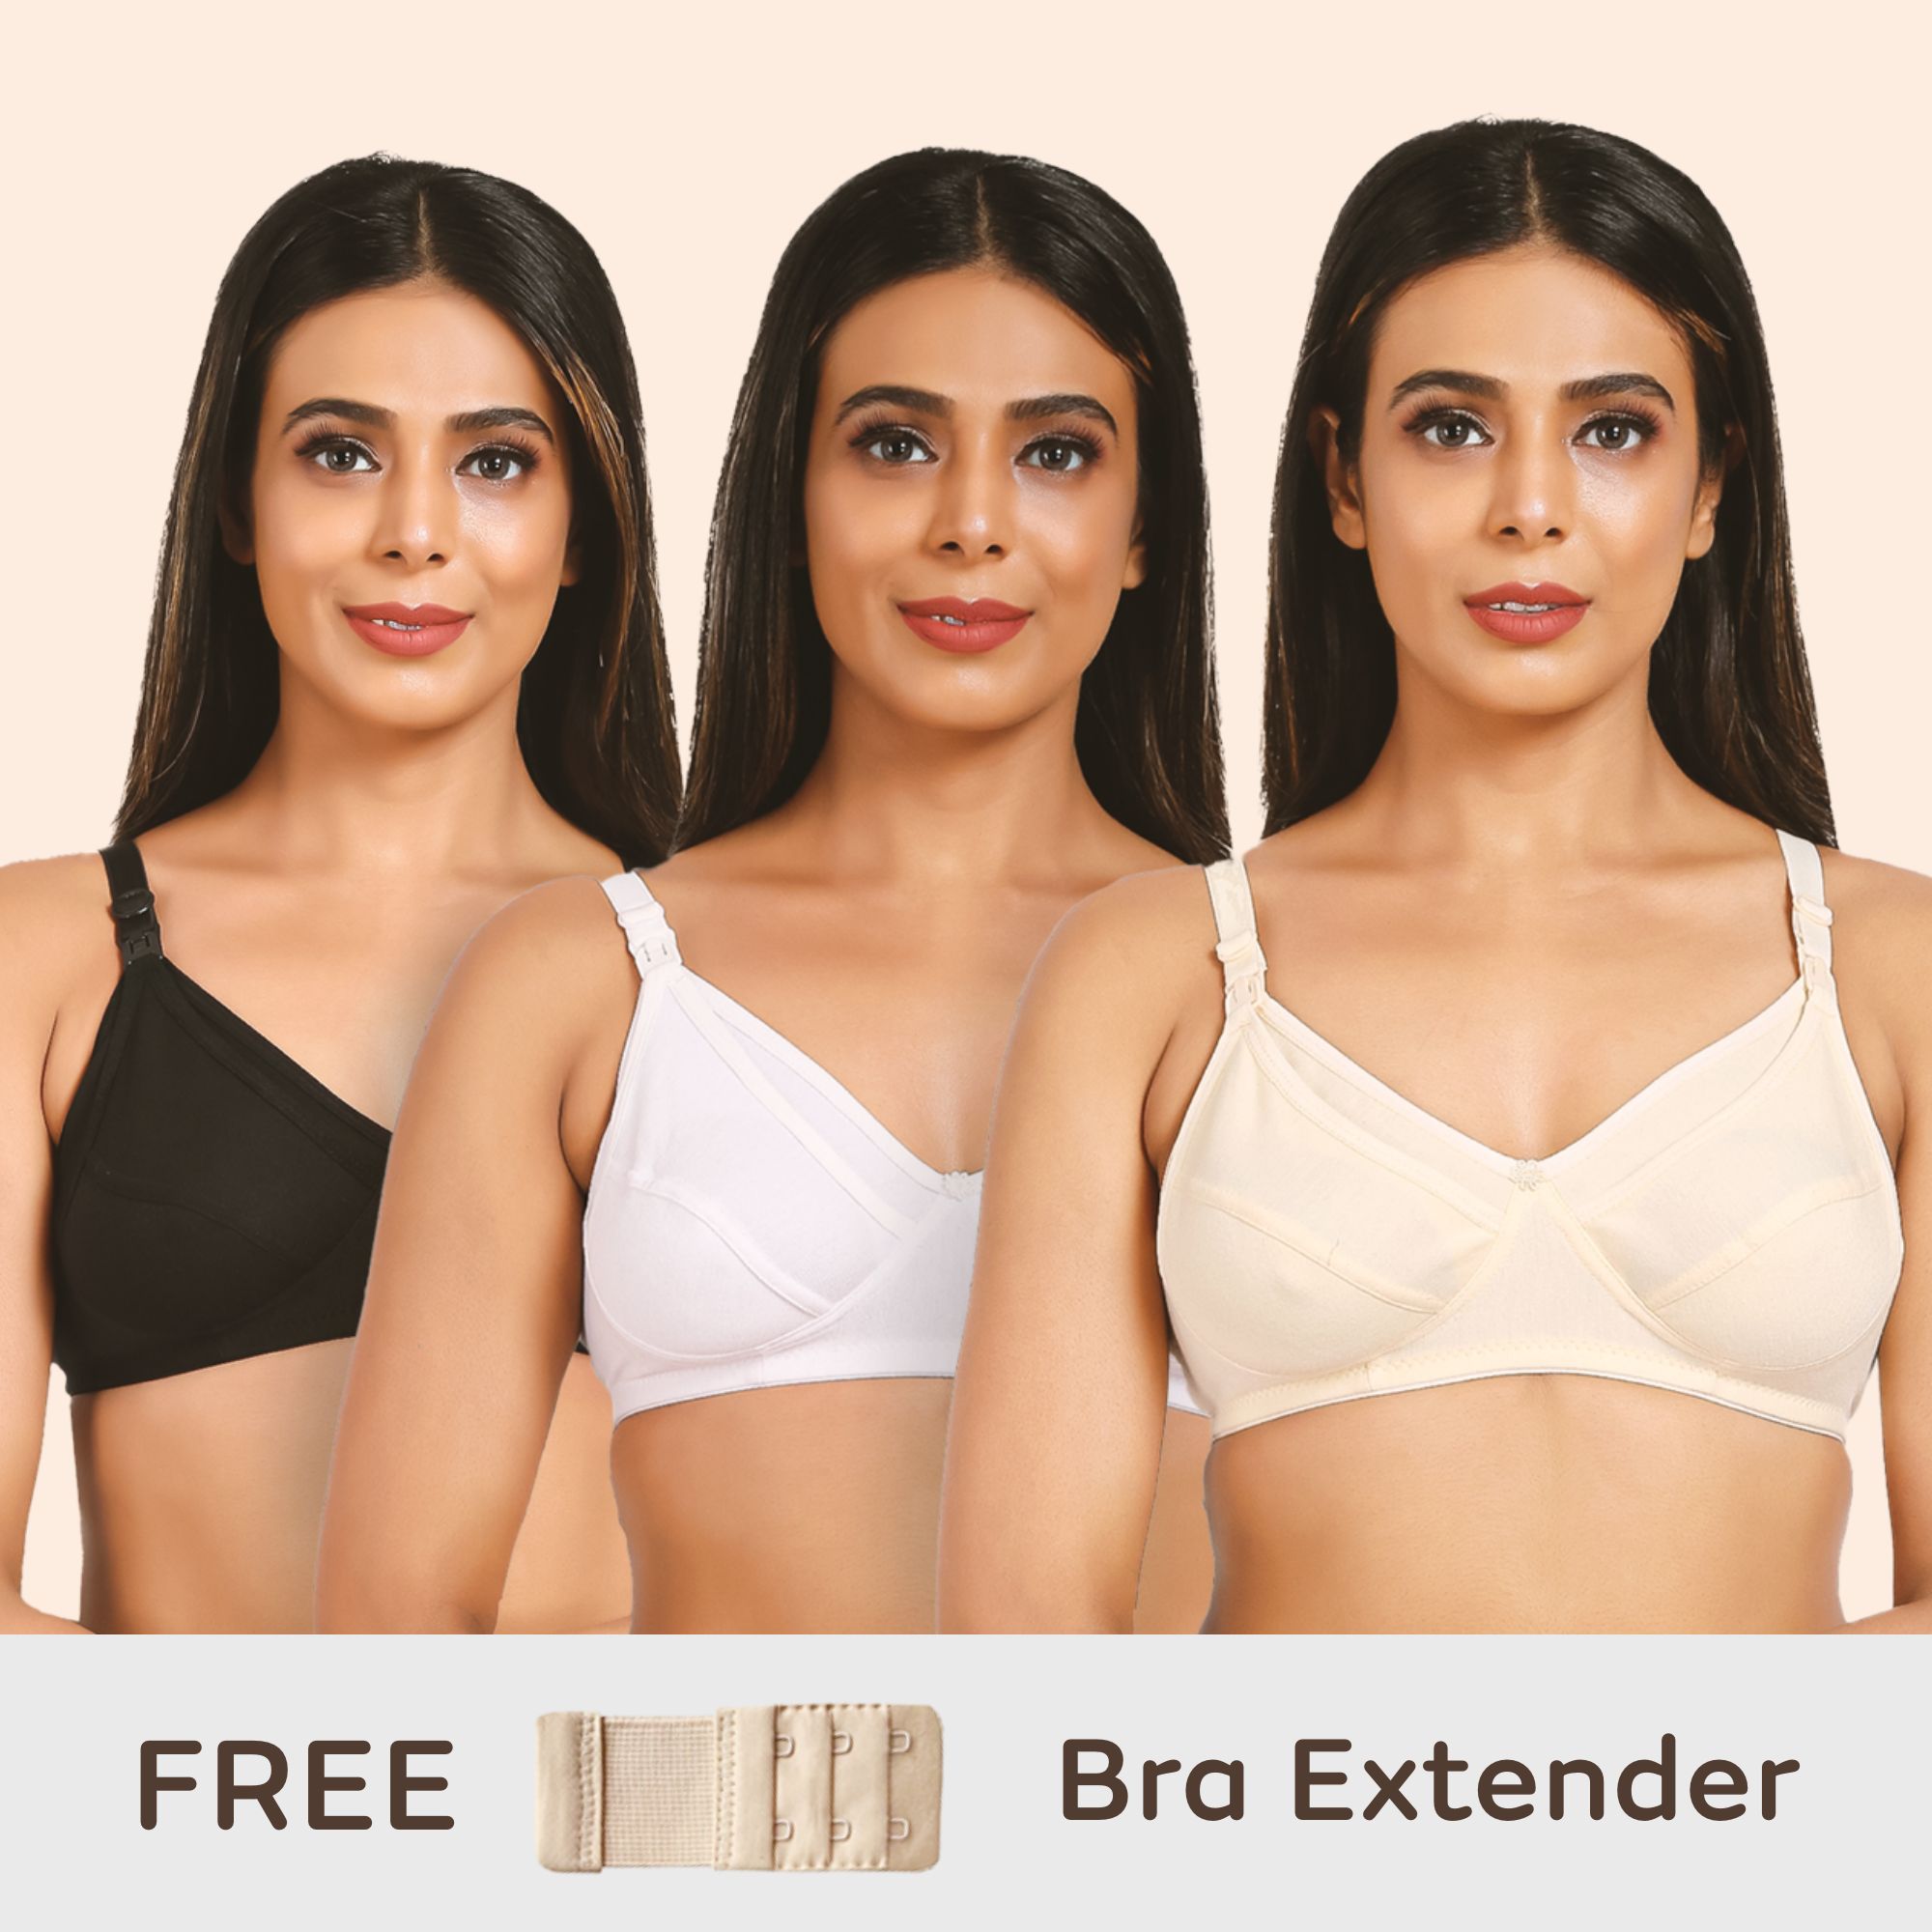 Maternity/Nursing Bras Non-Wired, Non-Padded - Pack of 3 with free Bra Extender (Classic Black, Classic White, Magnolia Cream) 32 B